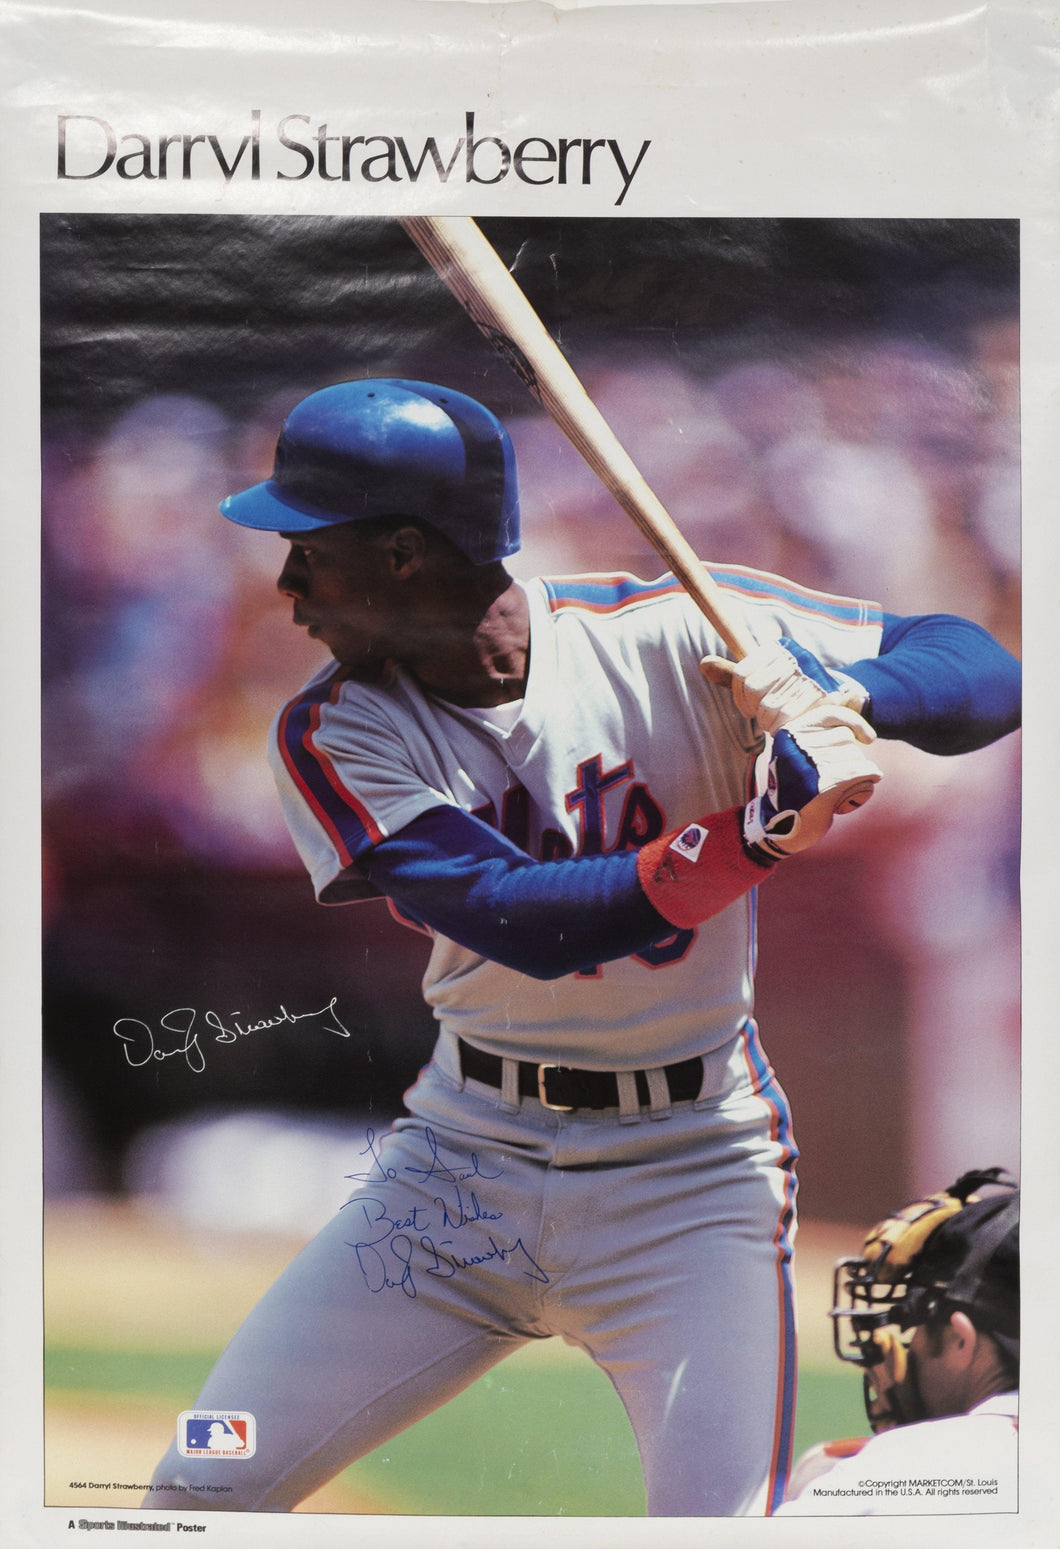 Darryl Strawberry - Sports Illustrated Poster | Unknown Artist,{{product.type}}